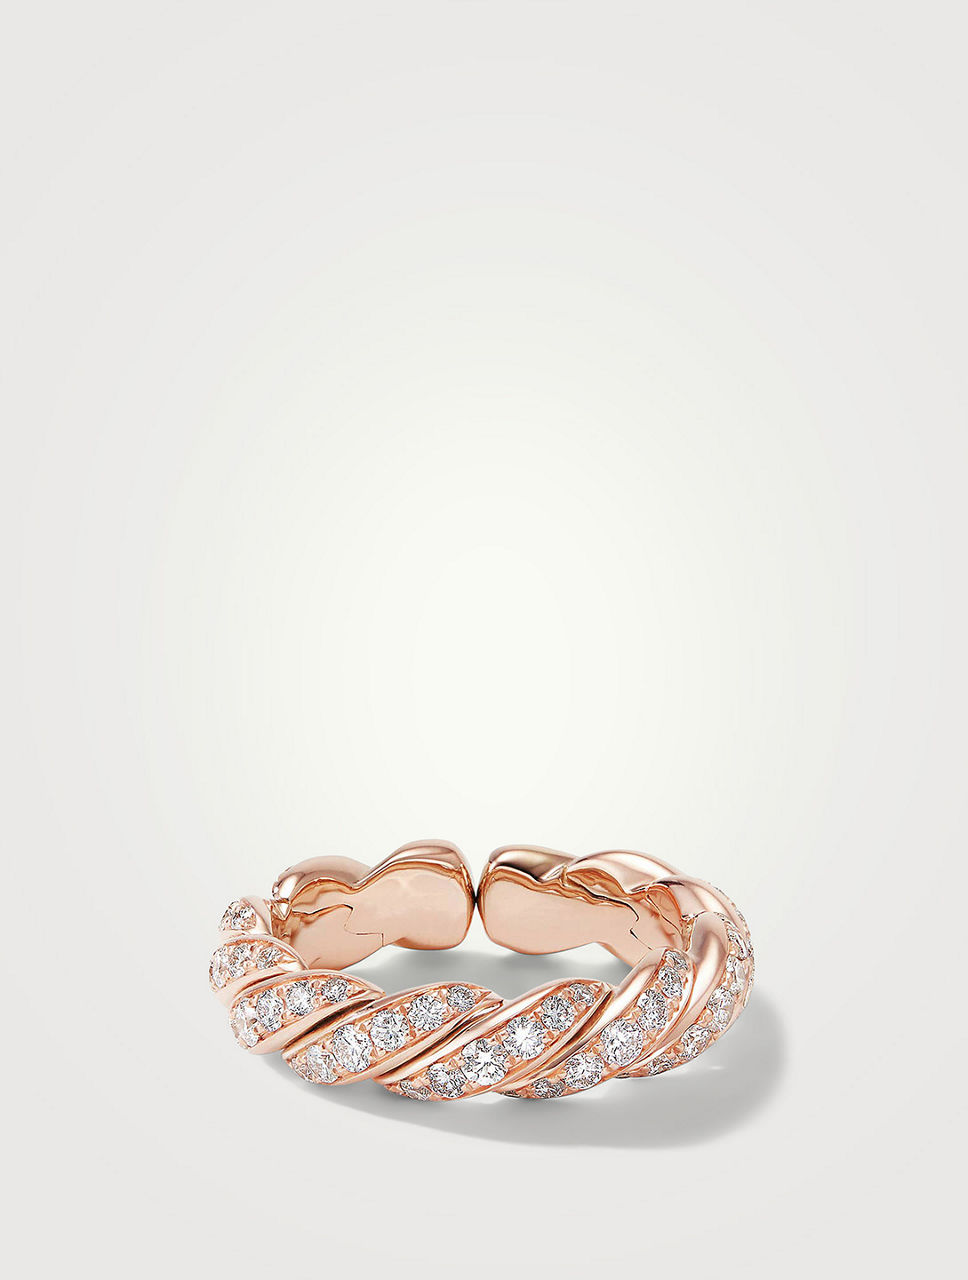 Pavéflex Band Ring In 18k Rose Gold With Diamonds